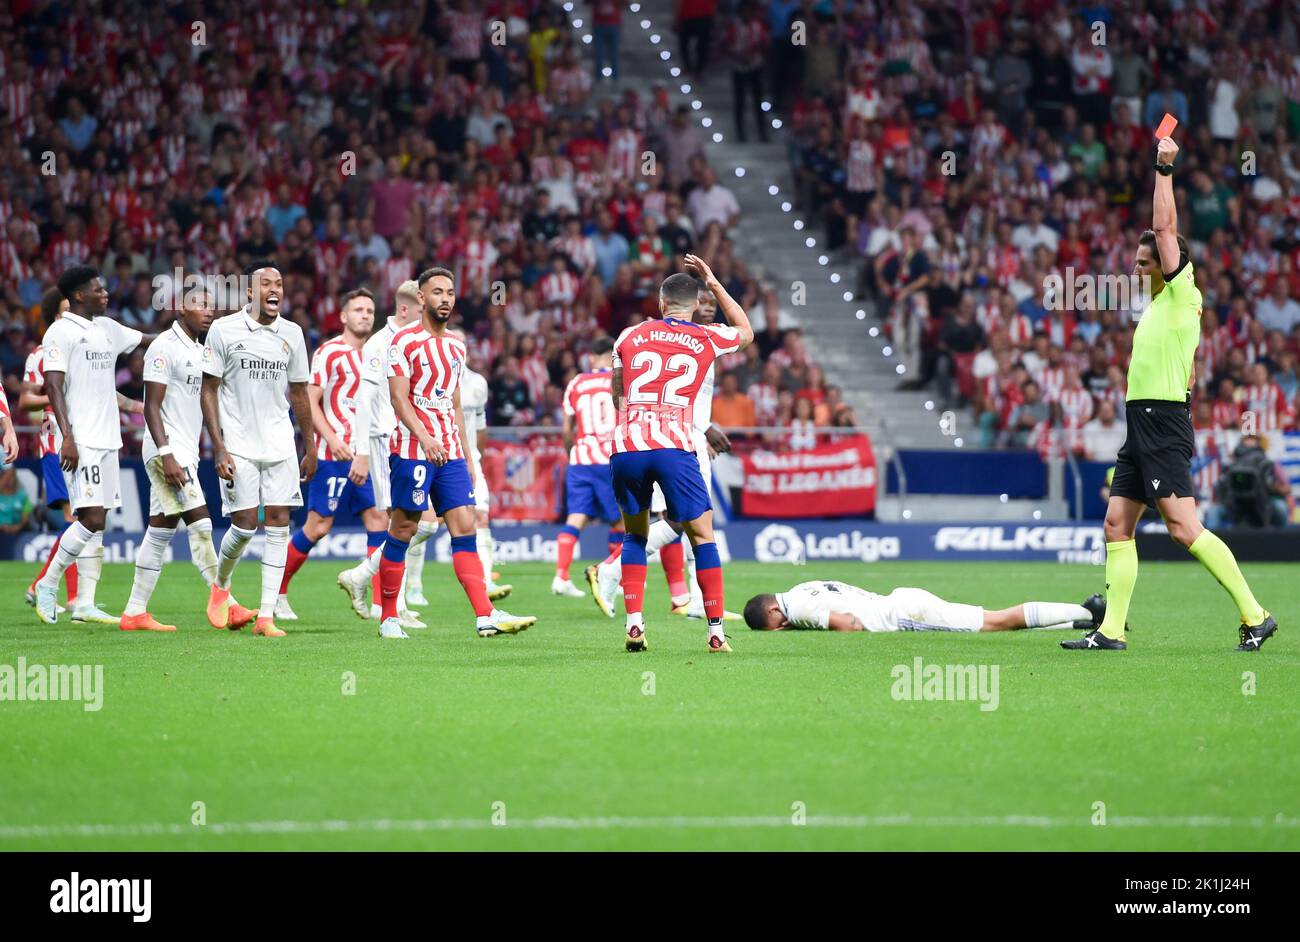 Madrid, Spain. 18th Sep, 2022. Mario Hermoso (3rd R) of Atletico de Madrid is given a red card during a La Liga Santander match between Atletico de Madrid and Rea Madrid in Madrid, Spain, Sept. 18, 2022. Credit: Gustavo Valiente/Xinhua/Alamy Live News Stock Photo